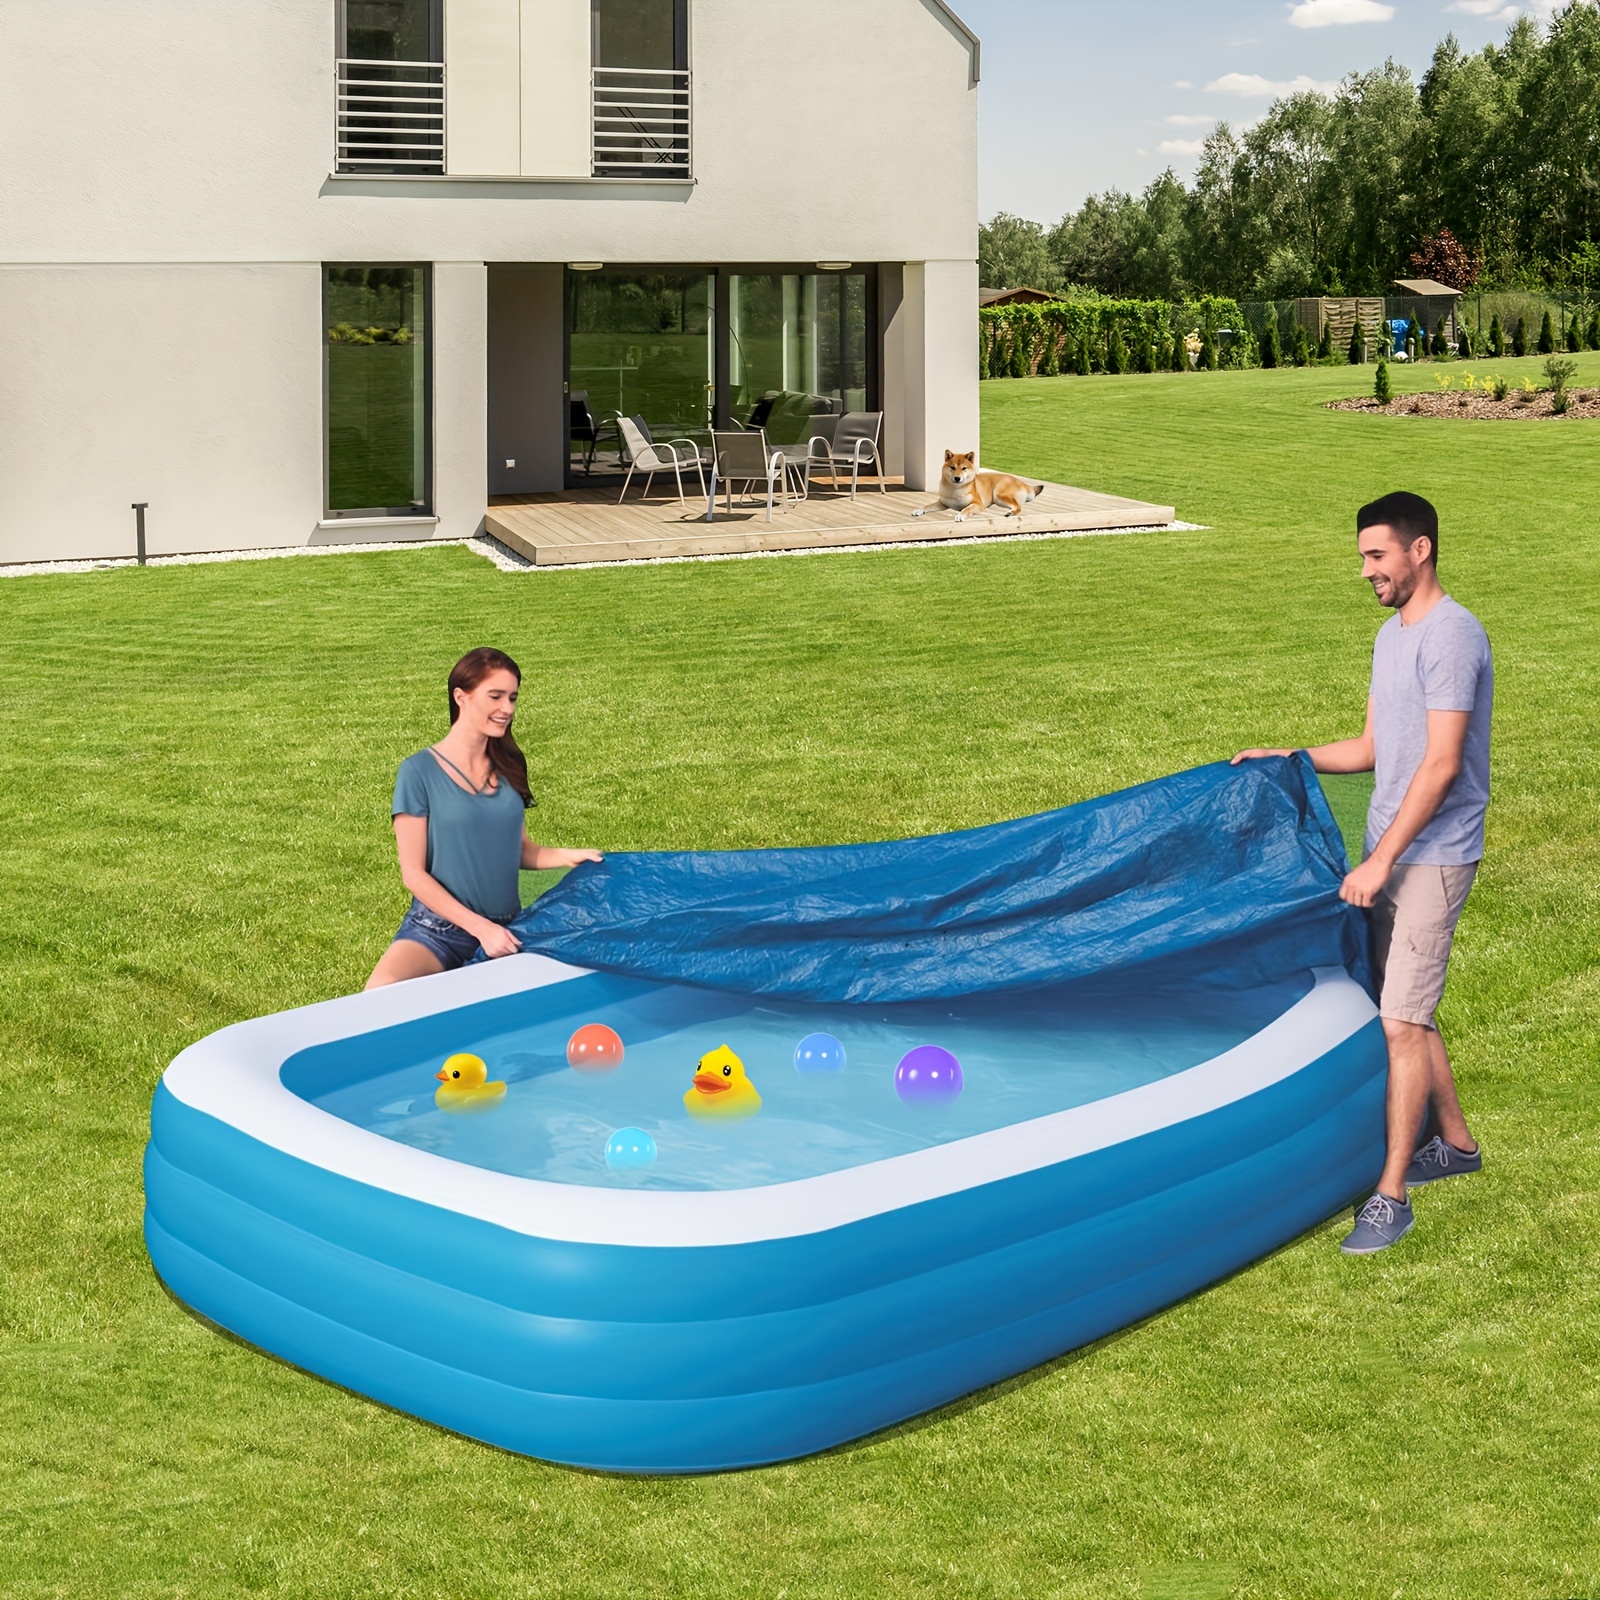 

outdoor Oasis" Heavy-duty Blue Square Inflatable Pool Cover - Waterproof, Dustproof With Elastic Edges For Above Ground Pools